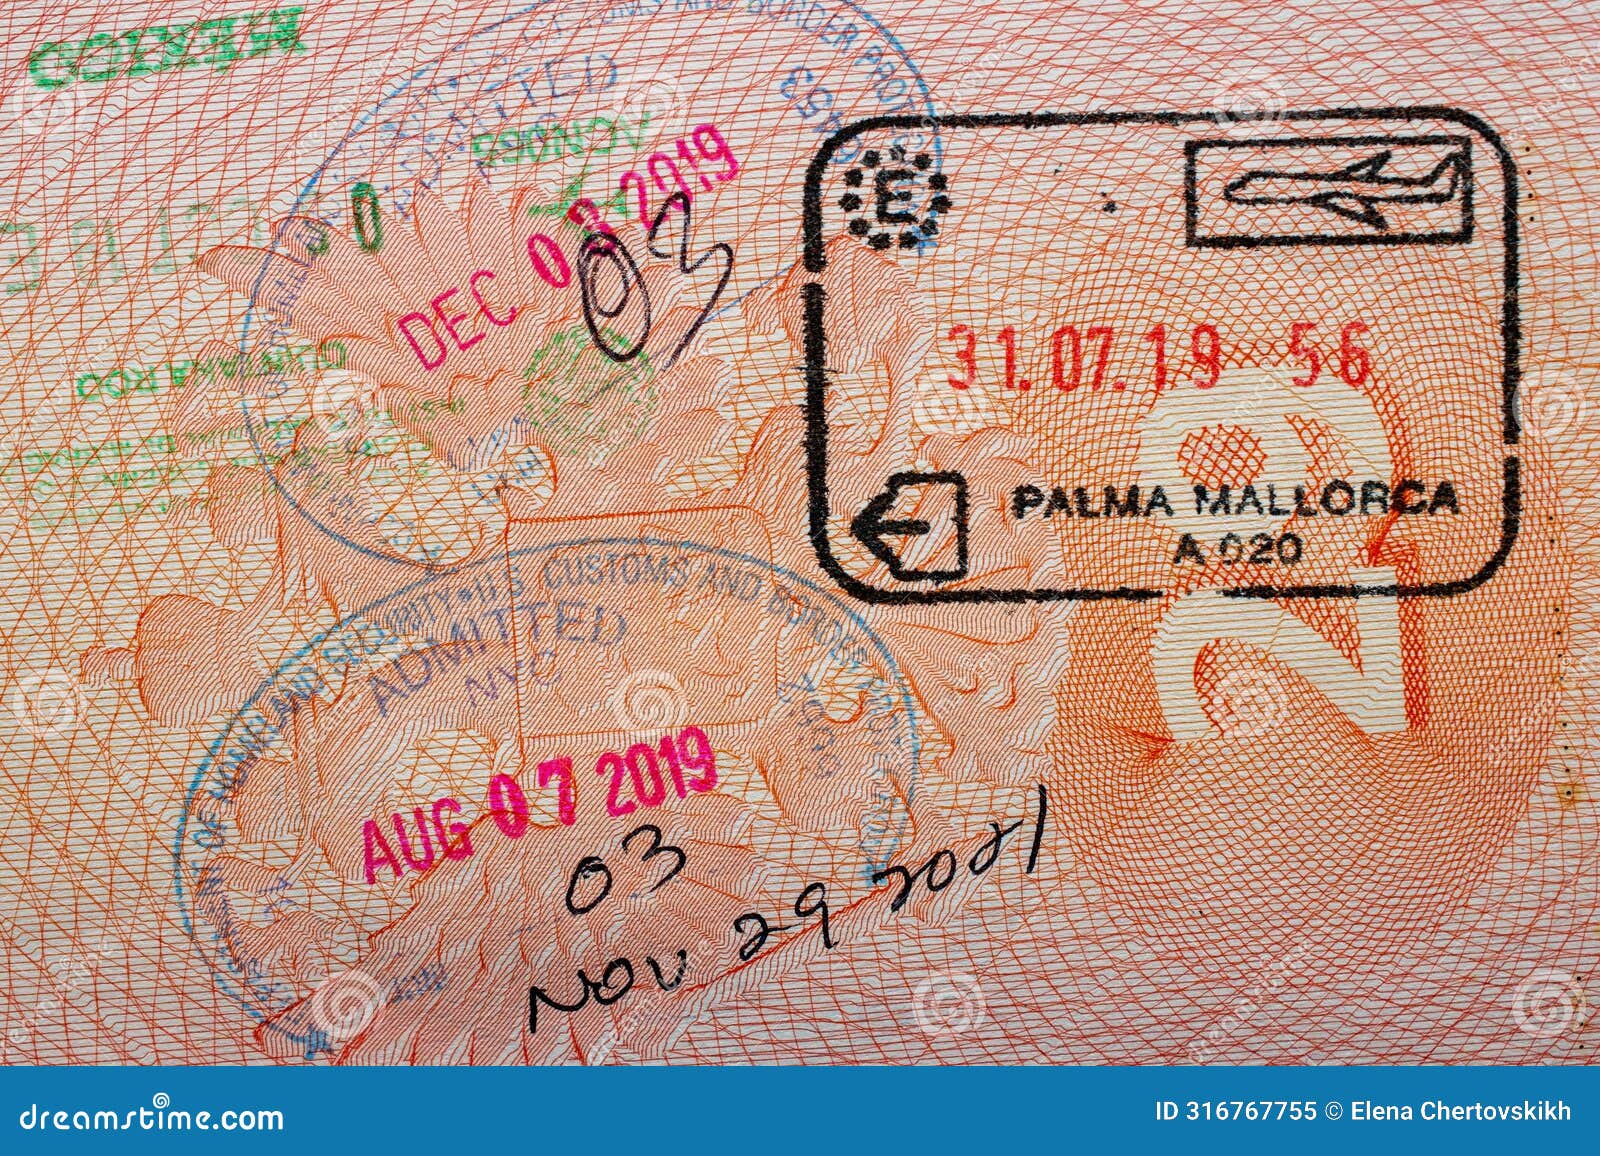 stamps in a travel passport, entry and exit stamp, emigration, immigration, tourism concept